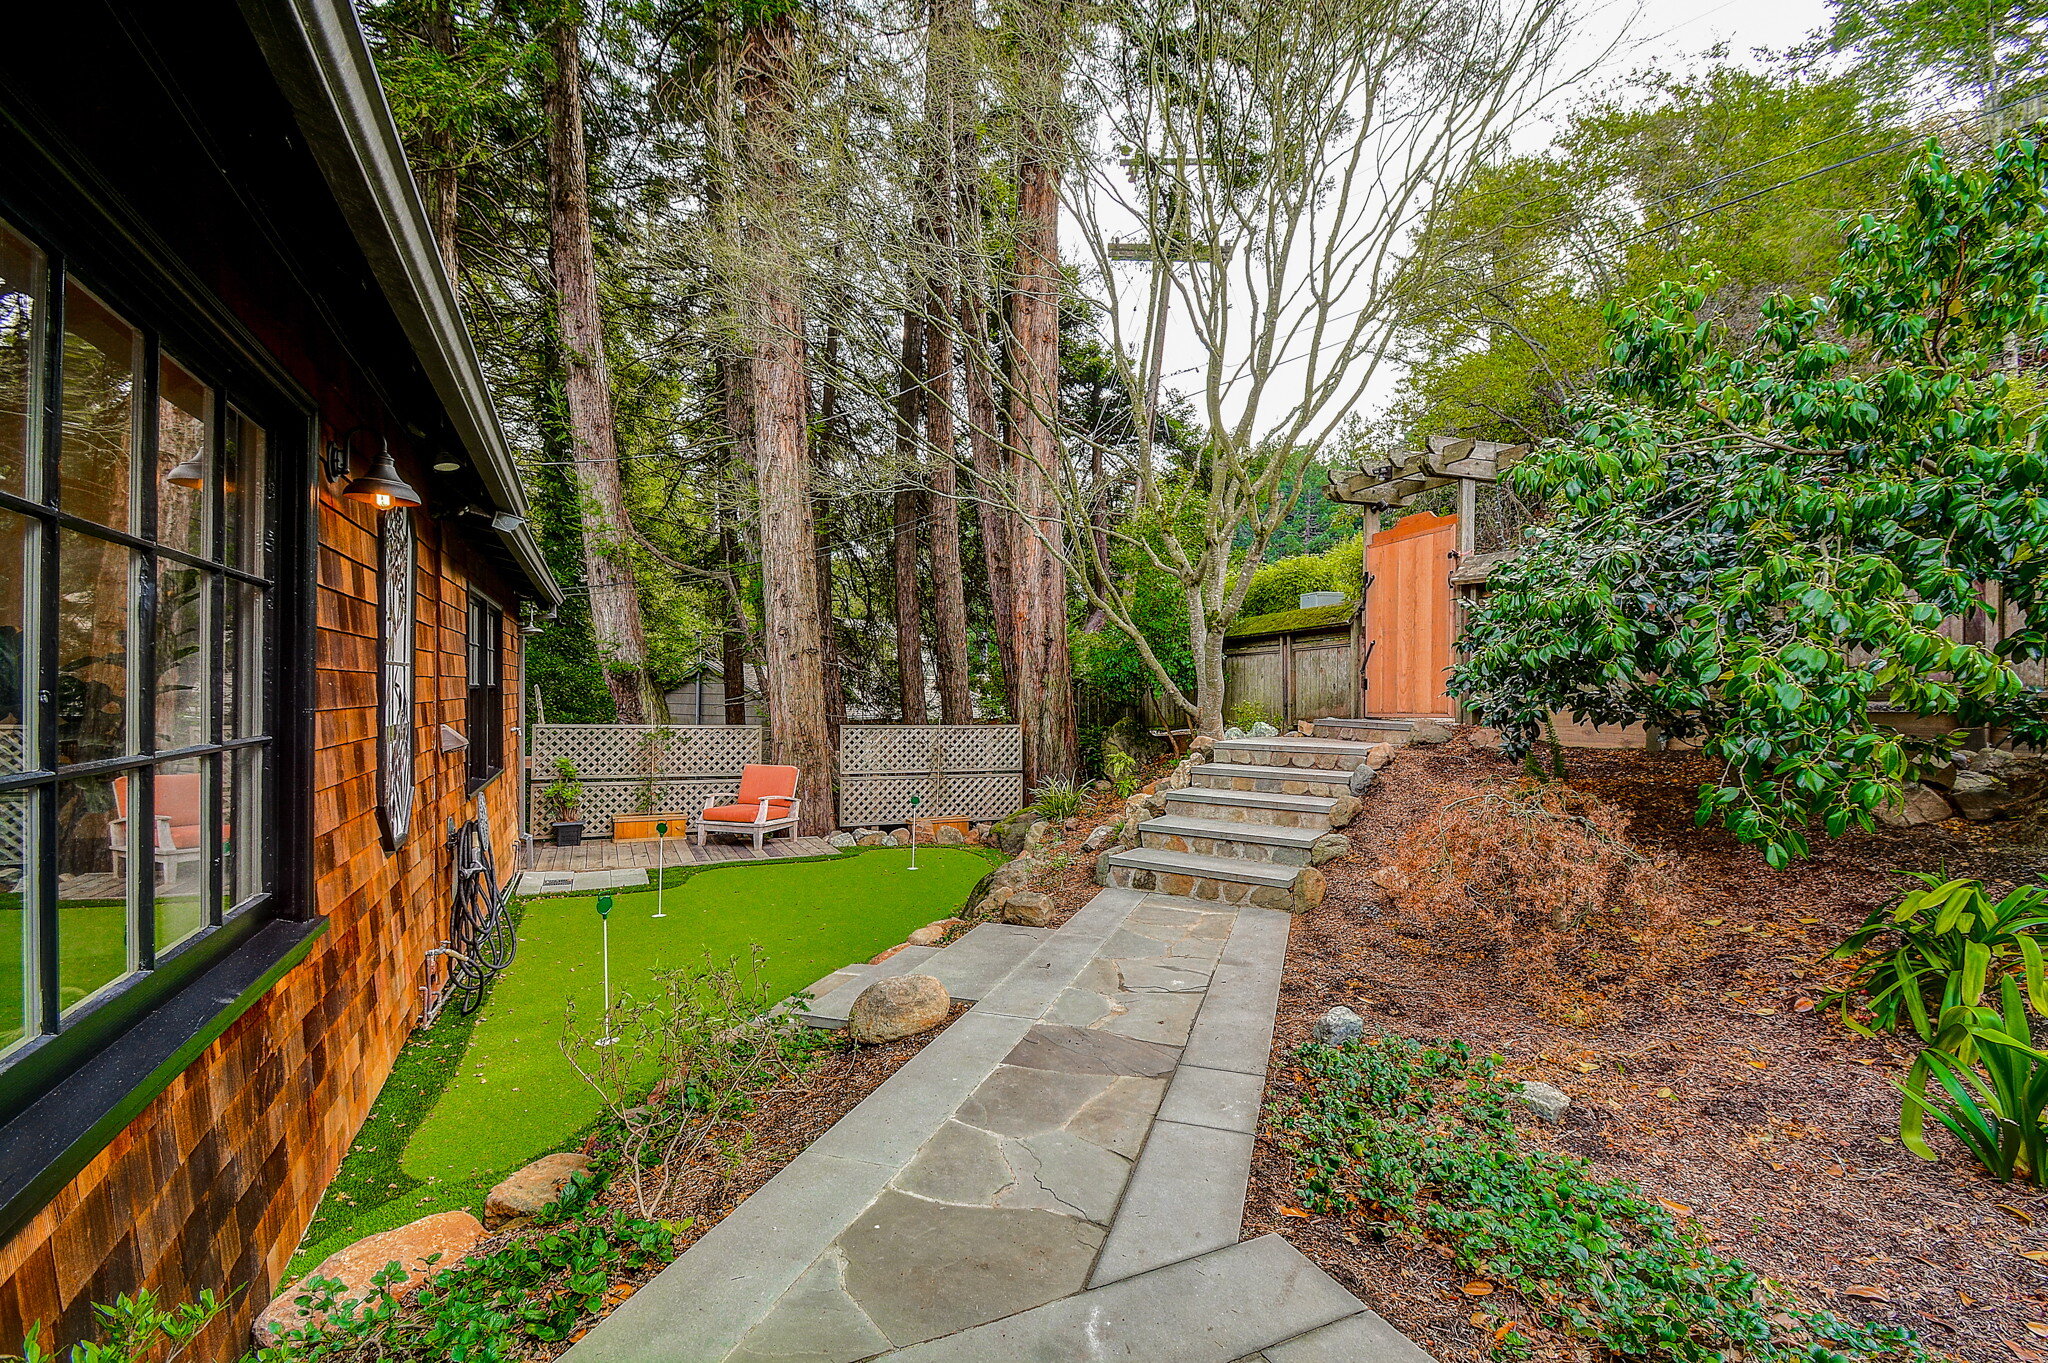 500 Edgewood Avenue-43- Mill Valley Real Estate - Listed by Allie Fornesi Top Mill Valley Realtor.jpg